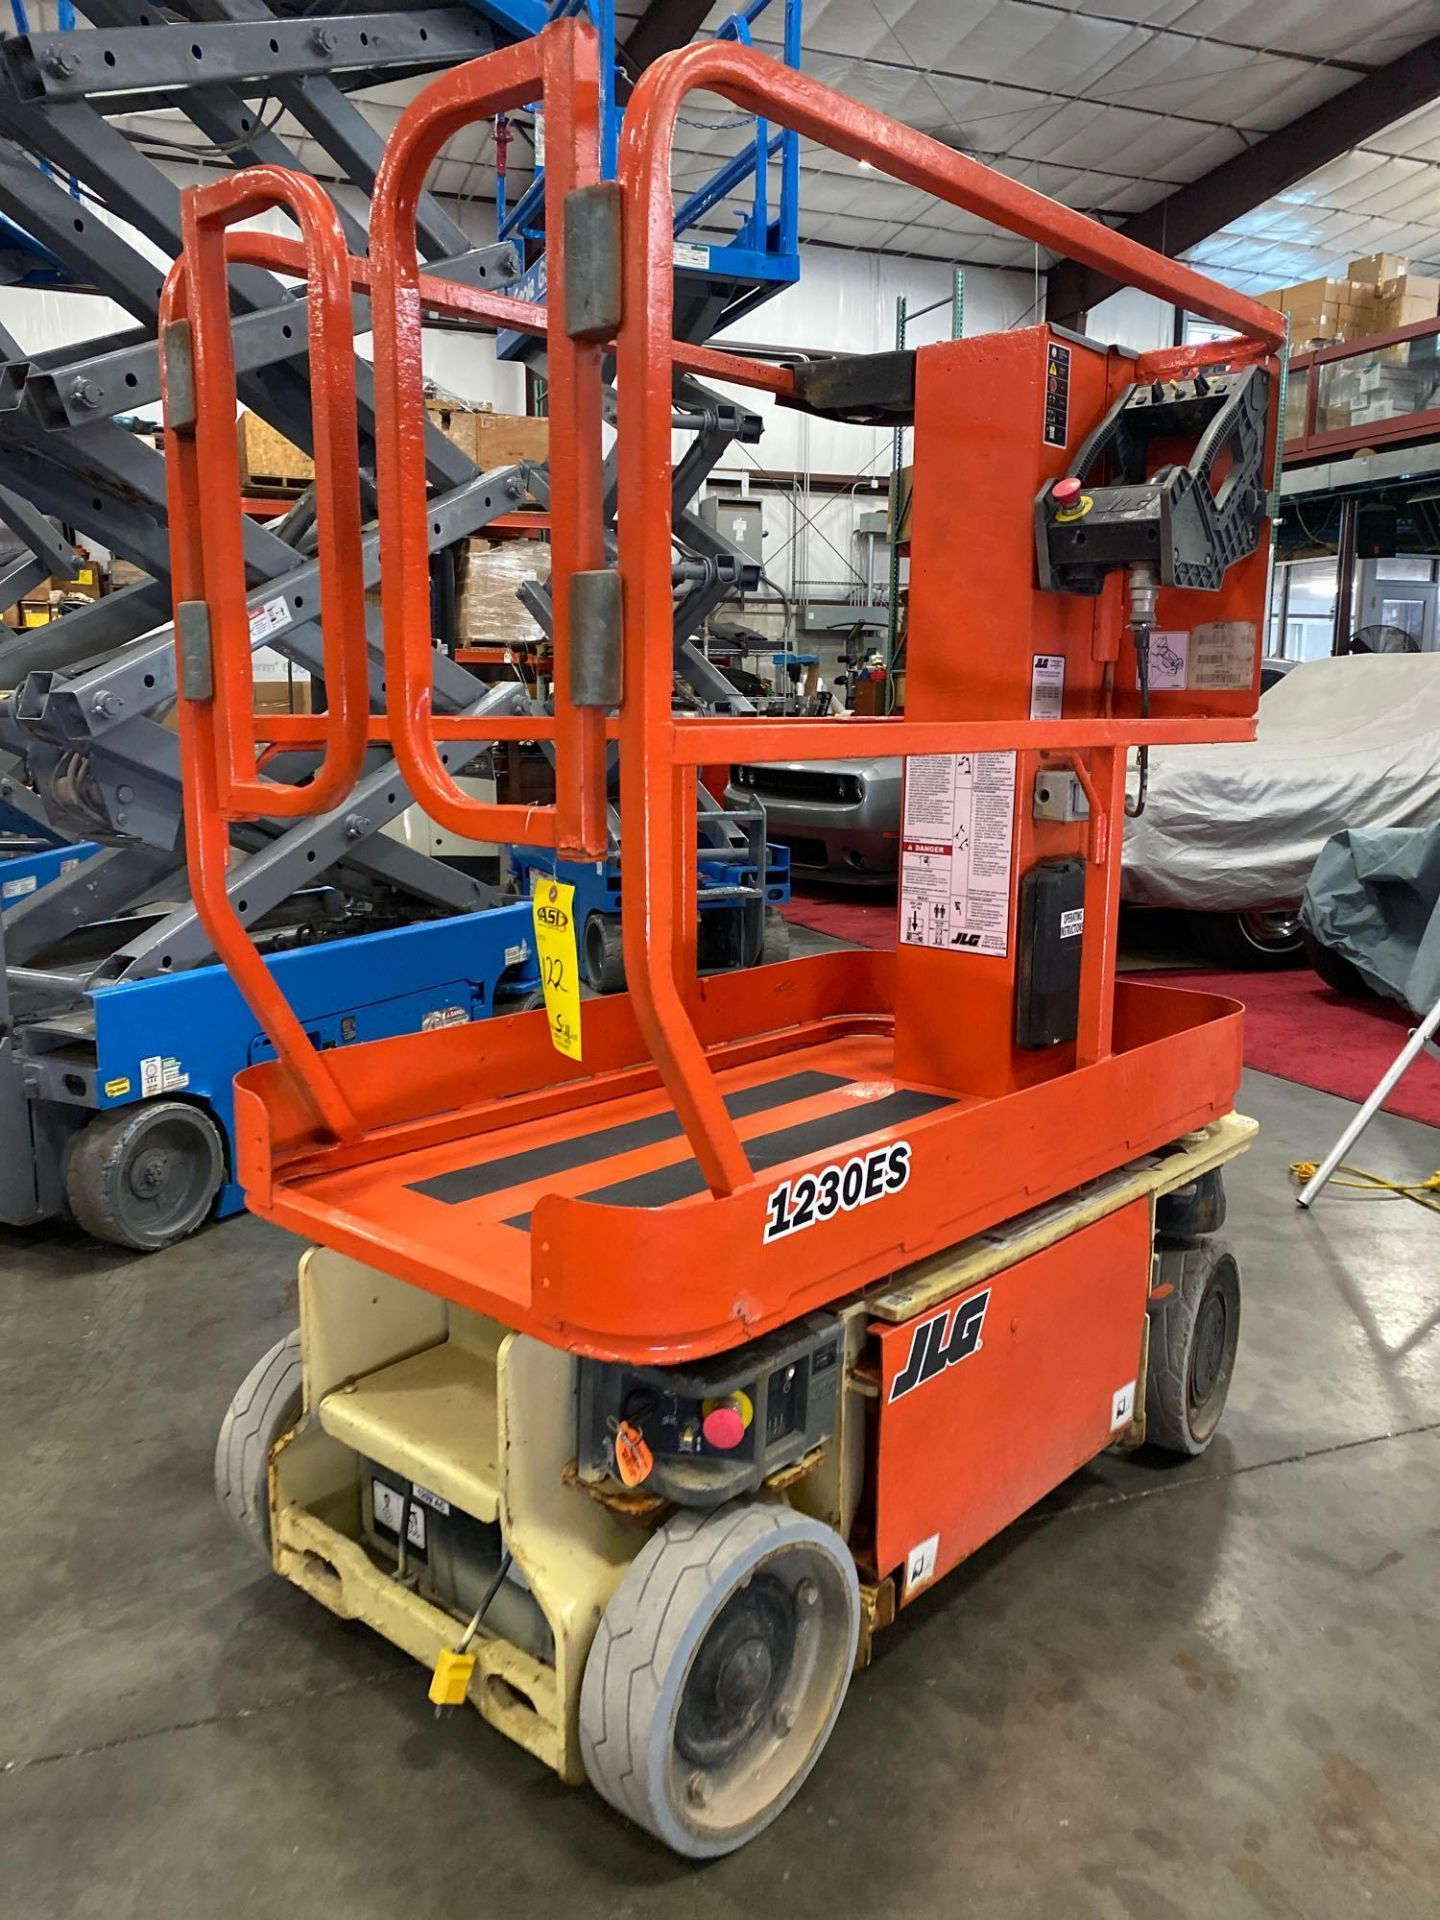 JLG 1230ES MAN LIFT, 12’ PLATFORM HEIGHT, 16’ WORKING HEIGHT, 24V, BUILT IN CHARGER, RUNS AND OPERAT - Image 9 of 14